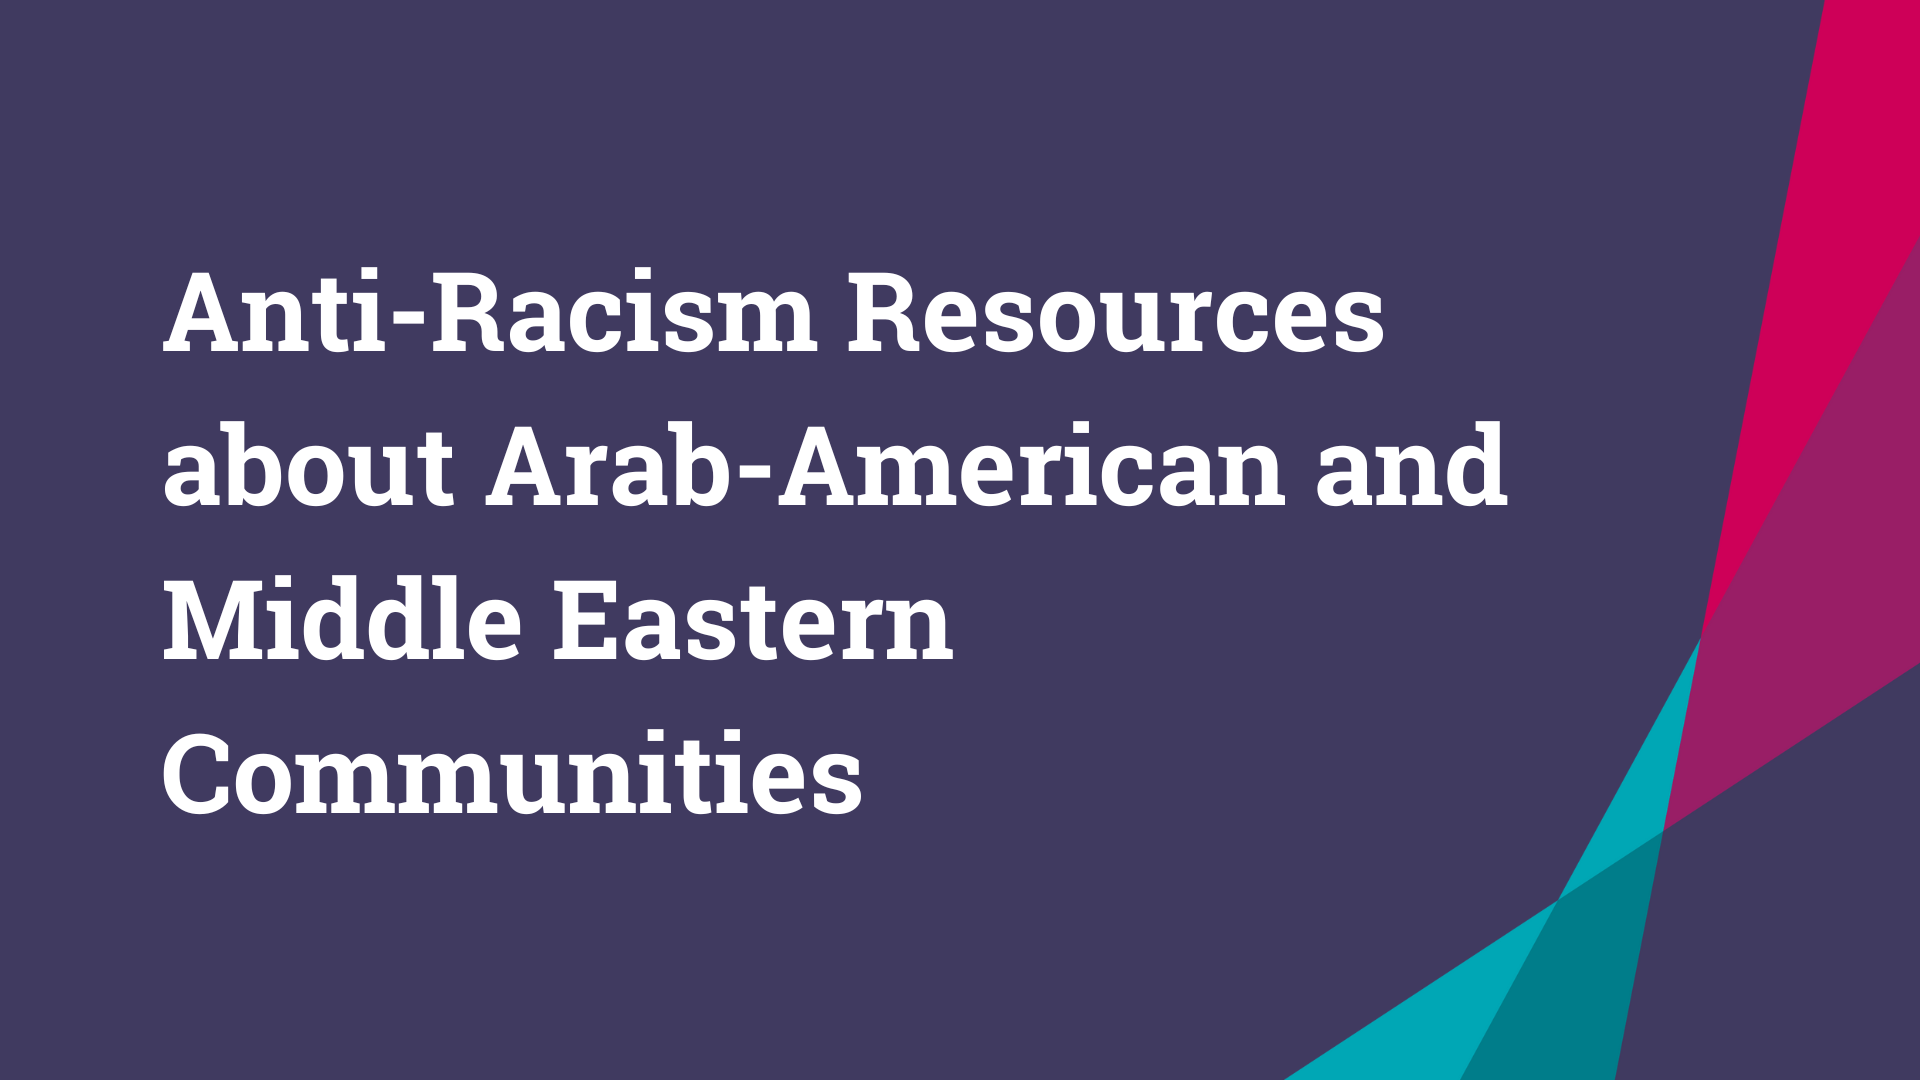 .Arab-American Middle Eastern Resources